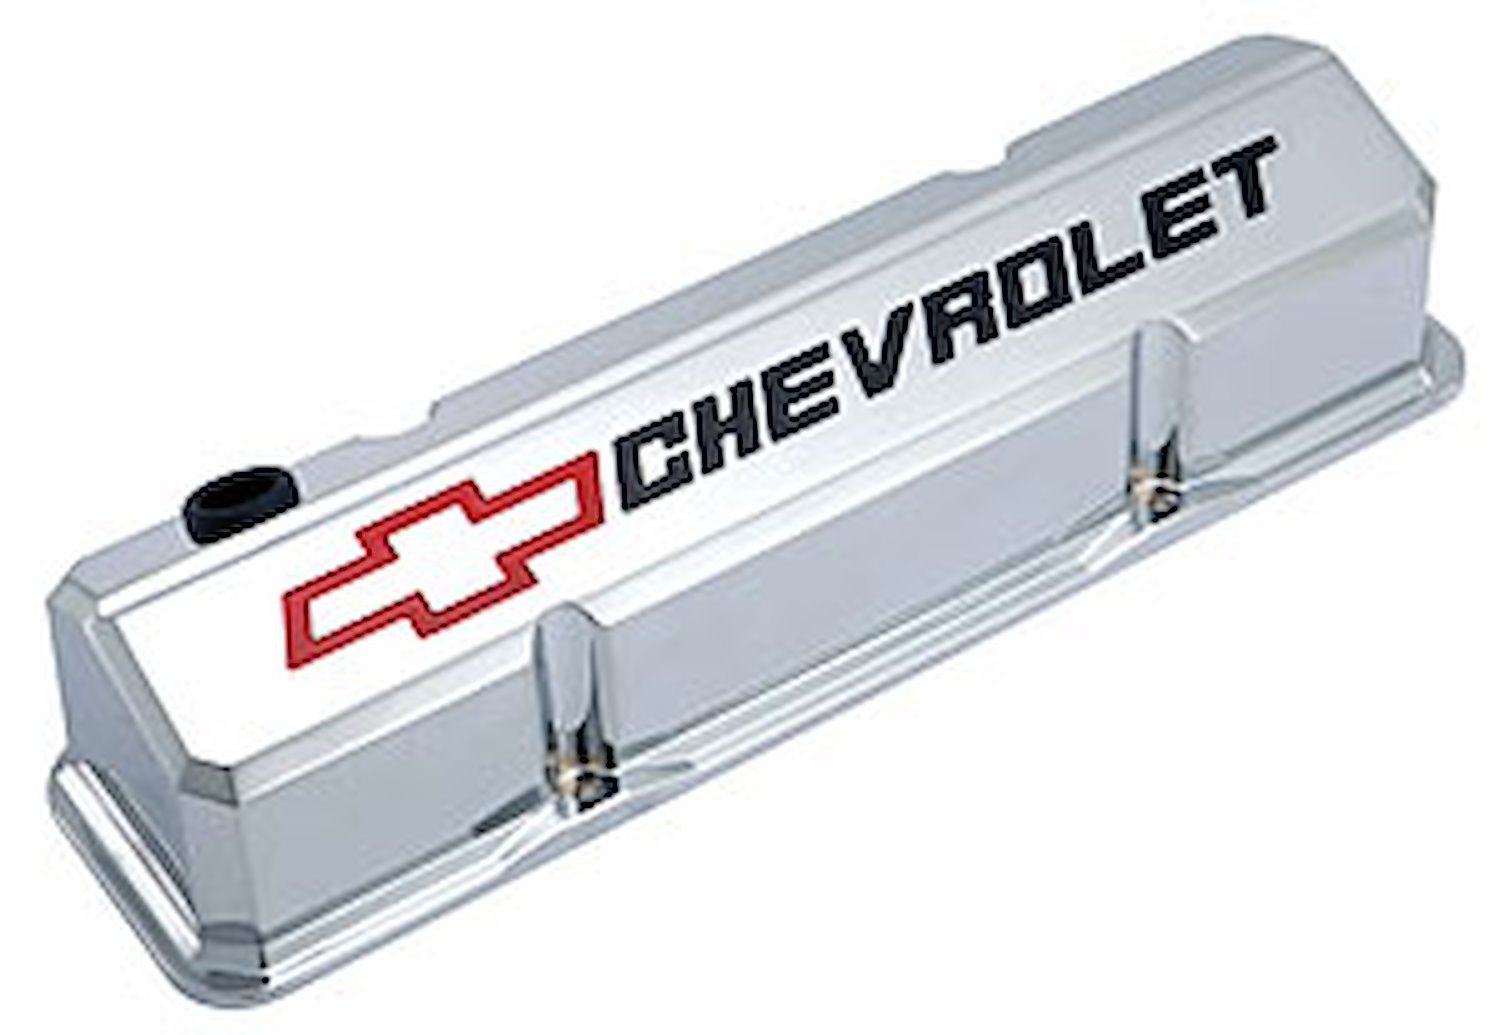 Die-Cast Slant-Edge Valve Covers for 1958-1986 Small Block Chevy Chevrolet/Bowtie Recessed Emblem in Chrome Finish